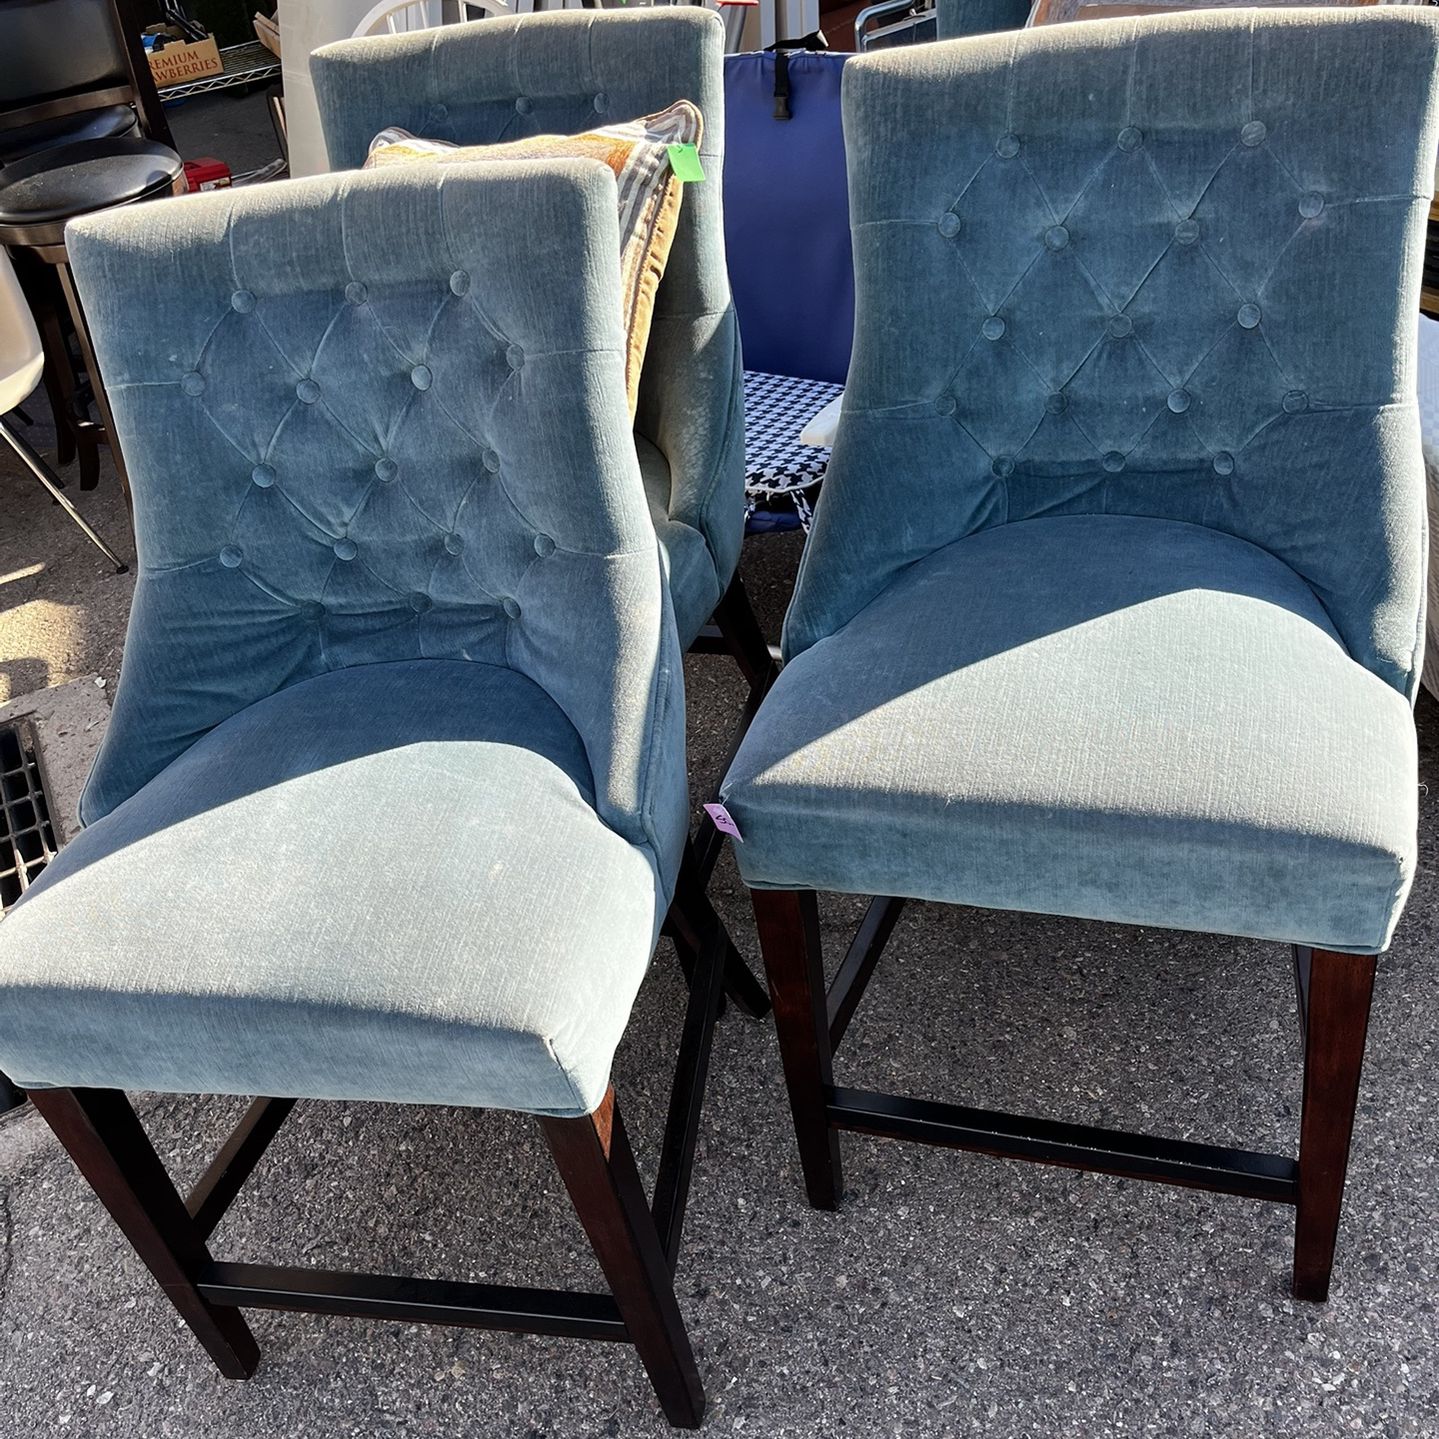 (4) Vintage Upholstered Chairs